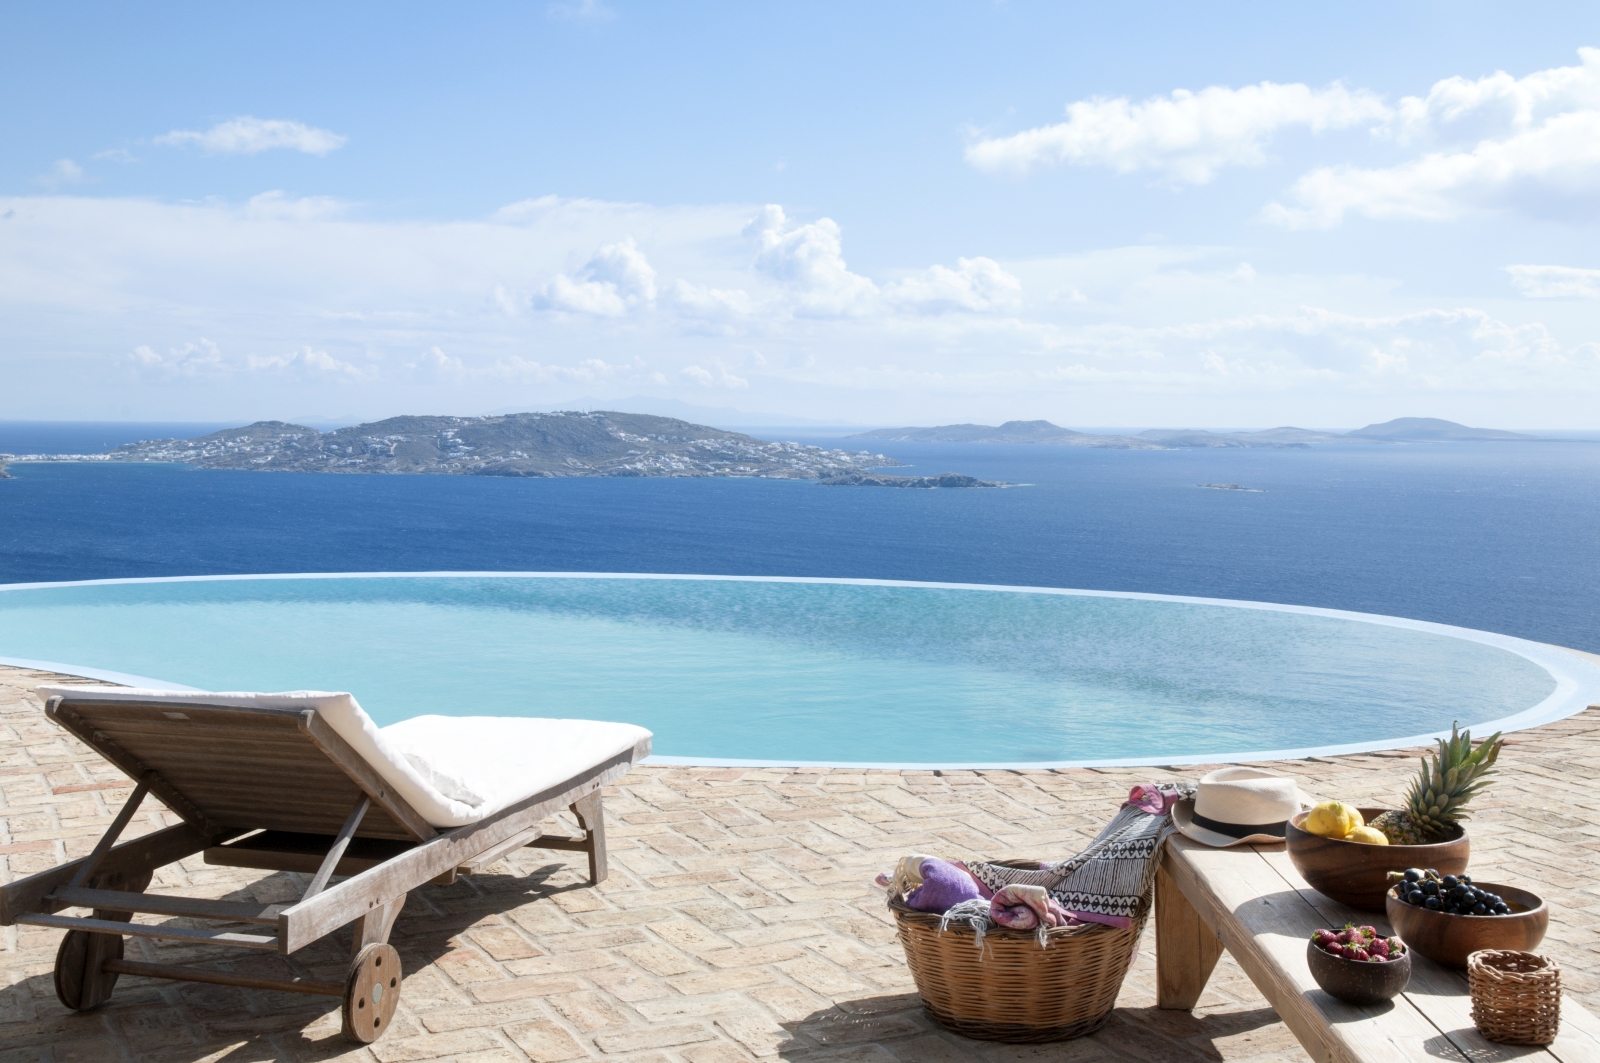 Terrace with infinity pool, sun lounger, fresh fruit and sea view at Villa Mari on Mykonos, Greece